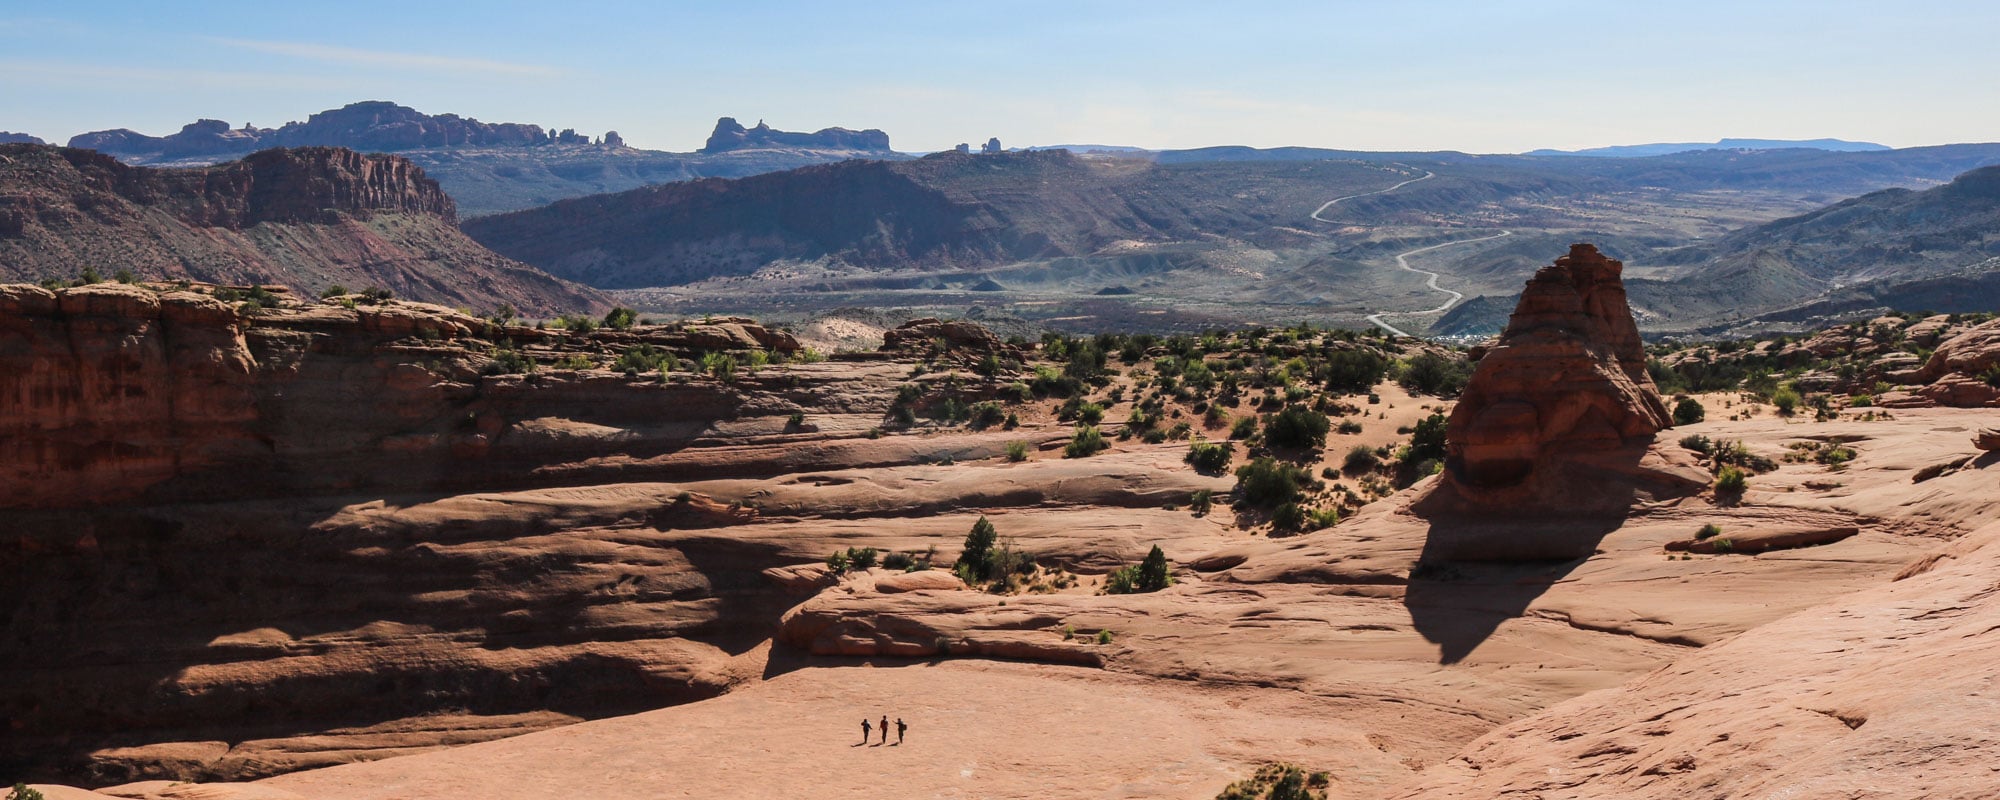 Three hikers in Arches National Park, Utah banner